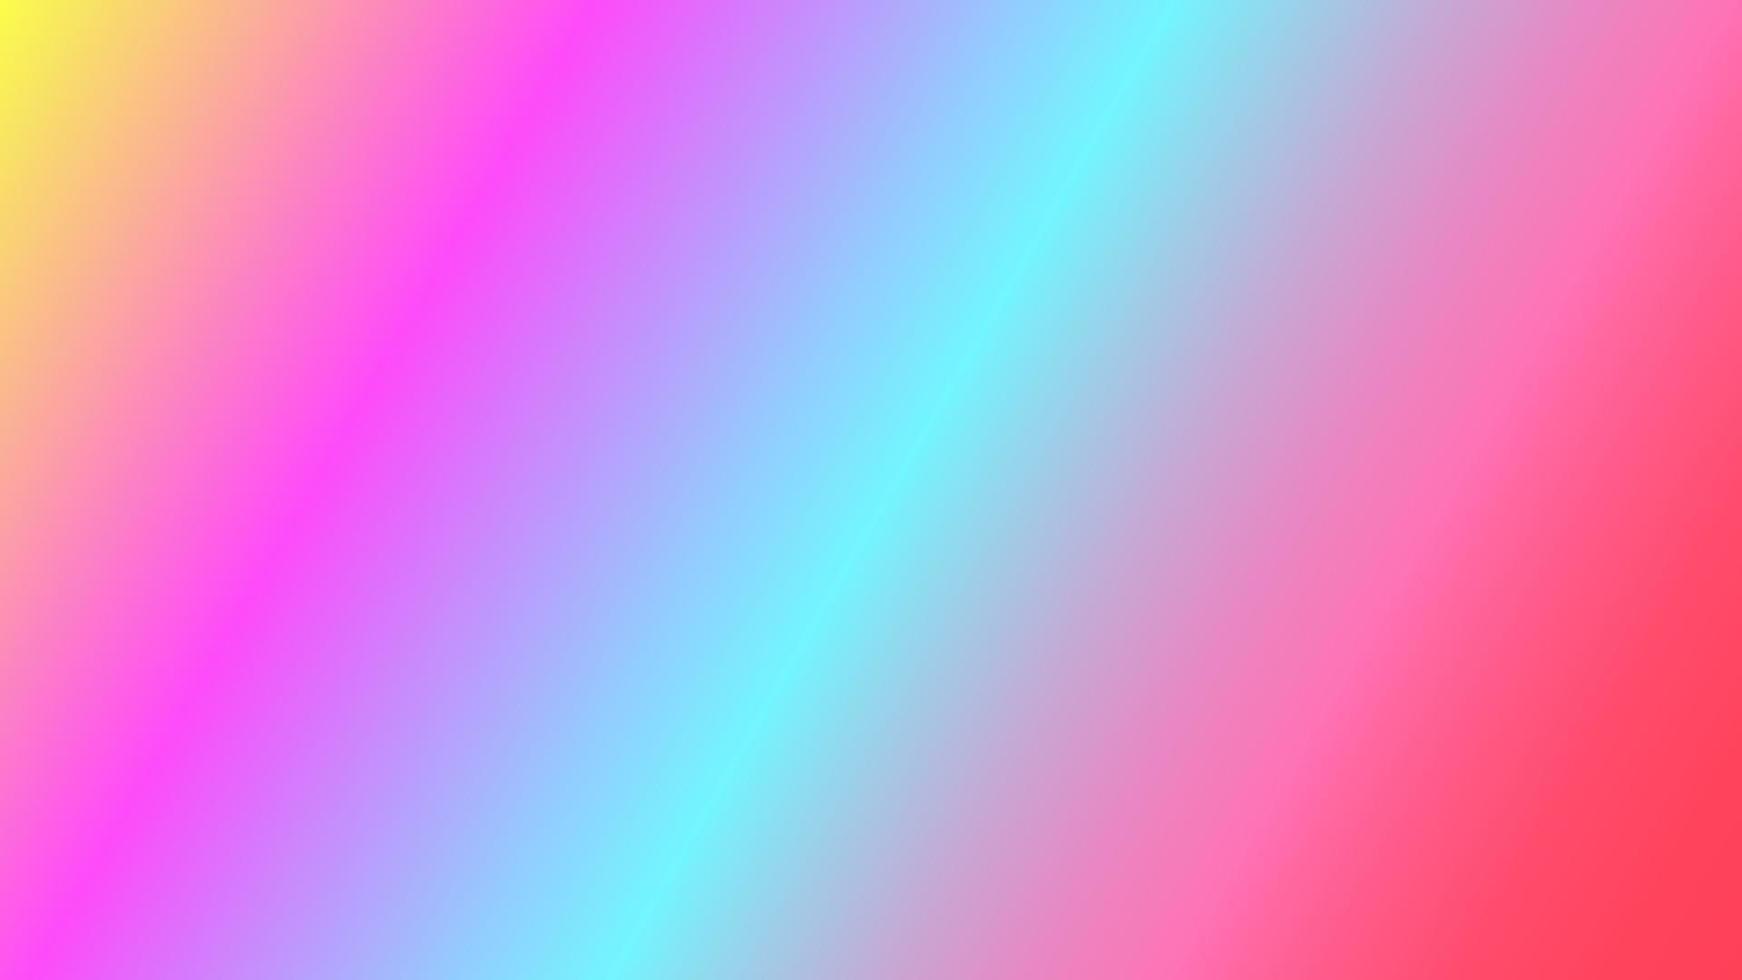 Abstract light colorful gradient background perfect for promotion, presentation, wallpaper, design etc vector